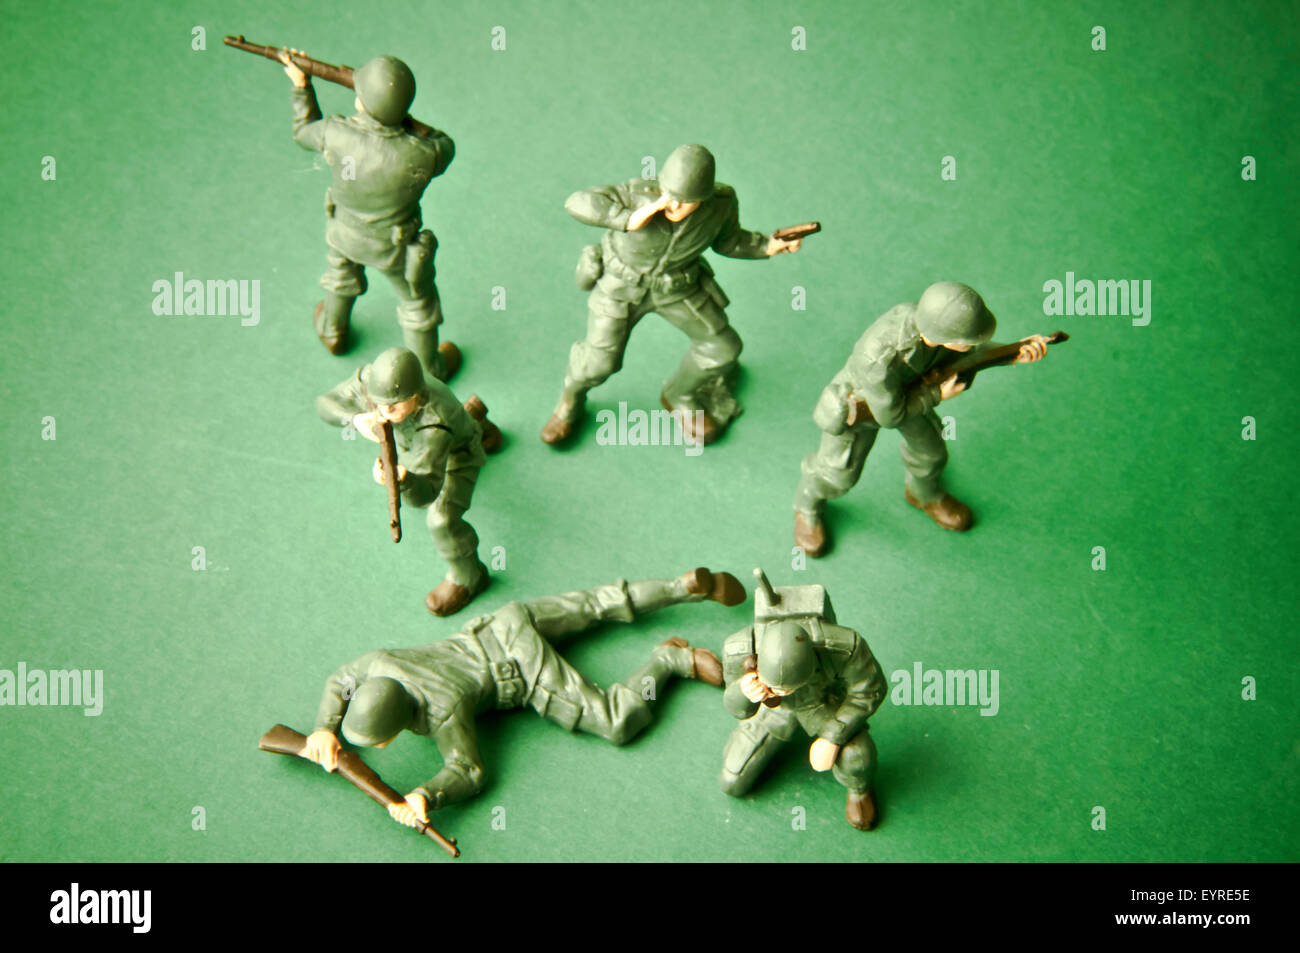 US army toy plastic soldiers Stock Photo